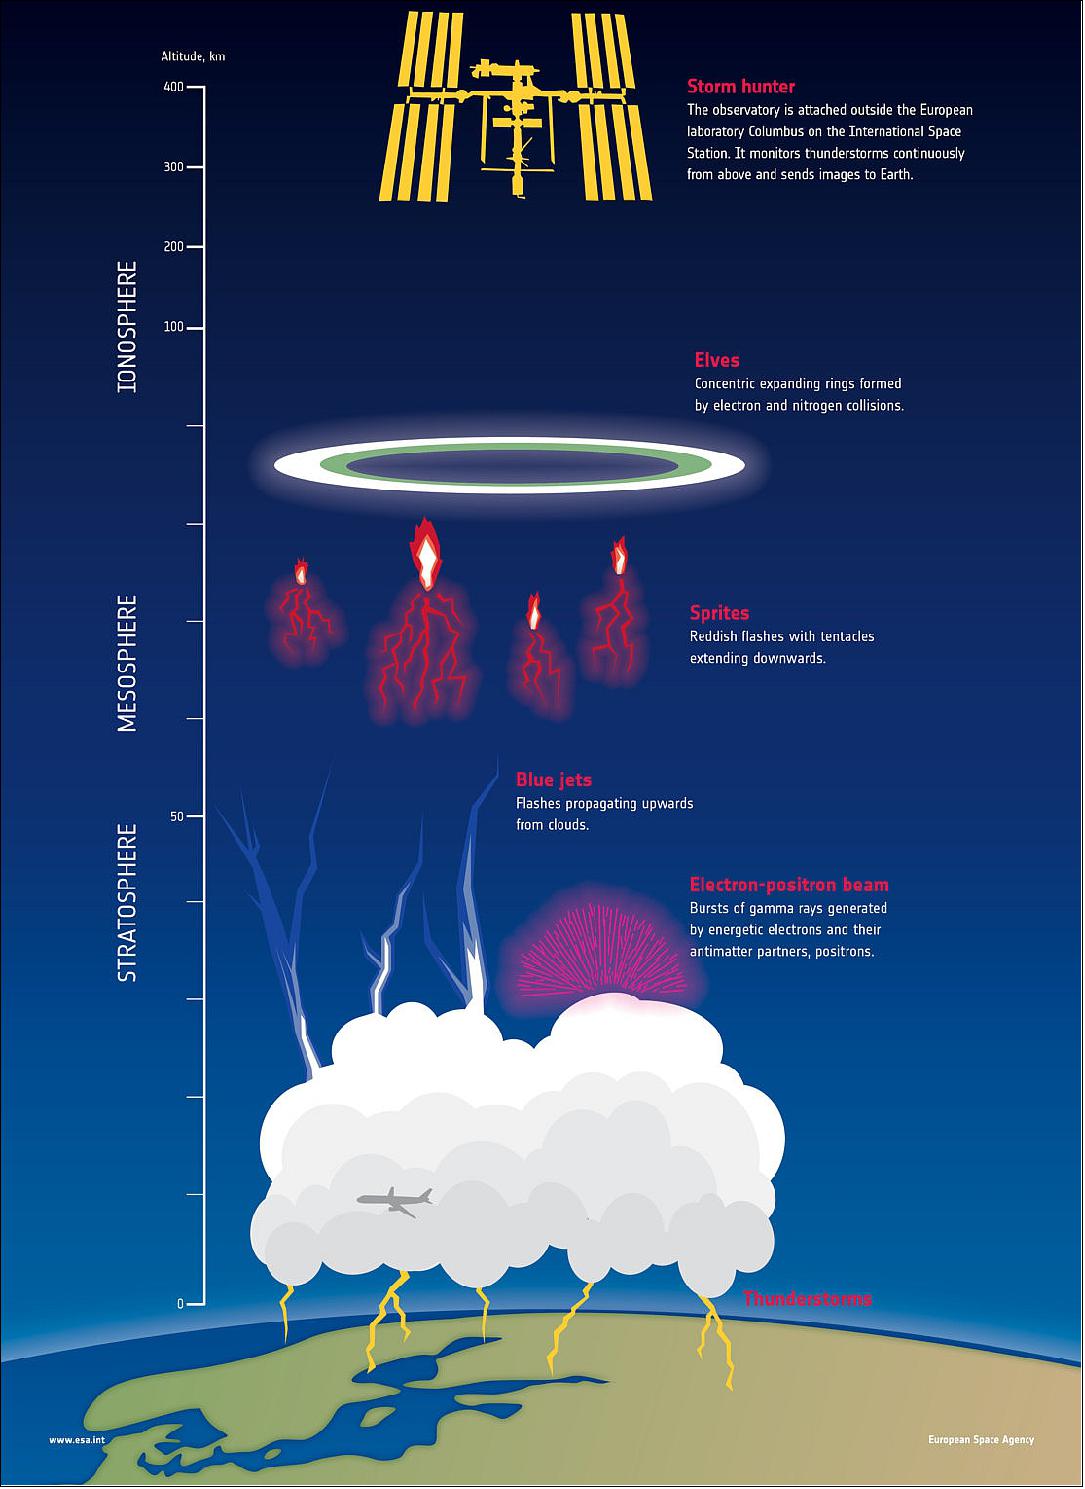 Figure 22: Atmospheric zoo of light and energy: ASIM observes a wide variety of phenomena in Earth's upper atmosphere. The inner working of these magnificent forces of nature are still unknown, but lightning affects the concentration of atmospheric gases that are important for the climate. New data will improve our understanding of the effect of thunderstorms on the atmosphere and contribute to more accurate climate models (image credit: ESA)